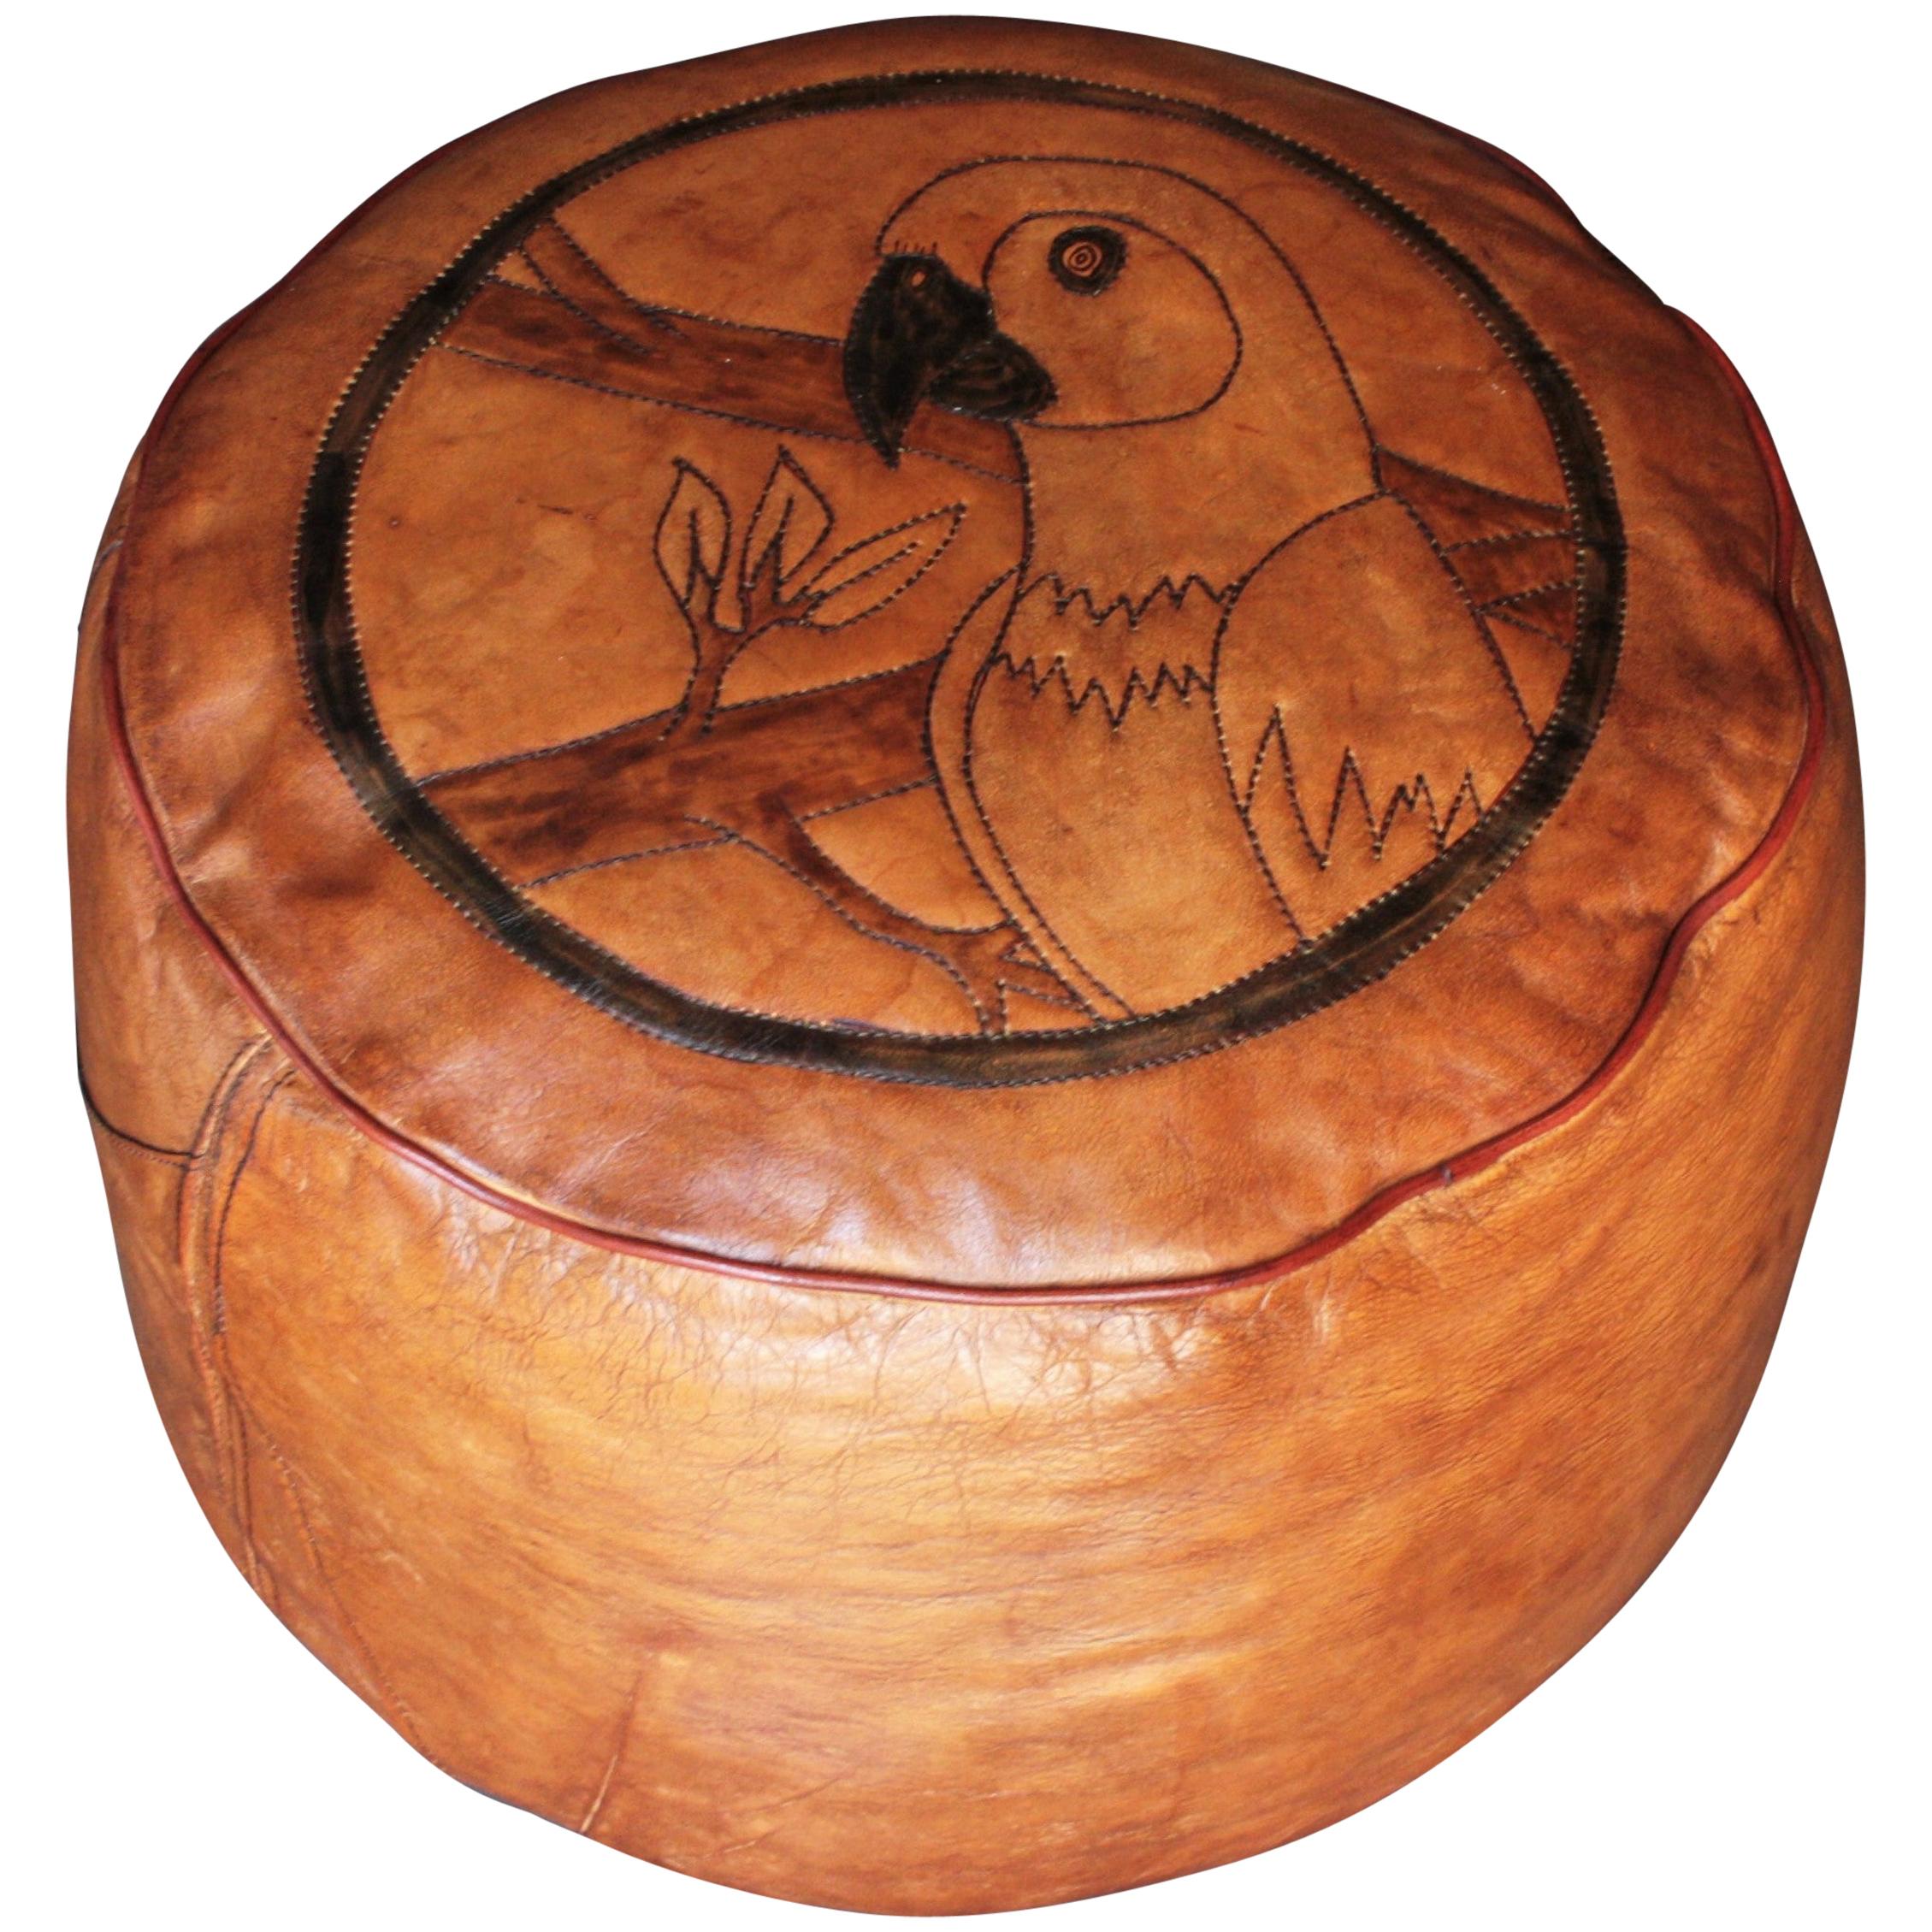 Pouf Ottoman or Footstool in Leather with Parrot Motif, 1960s